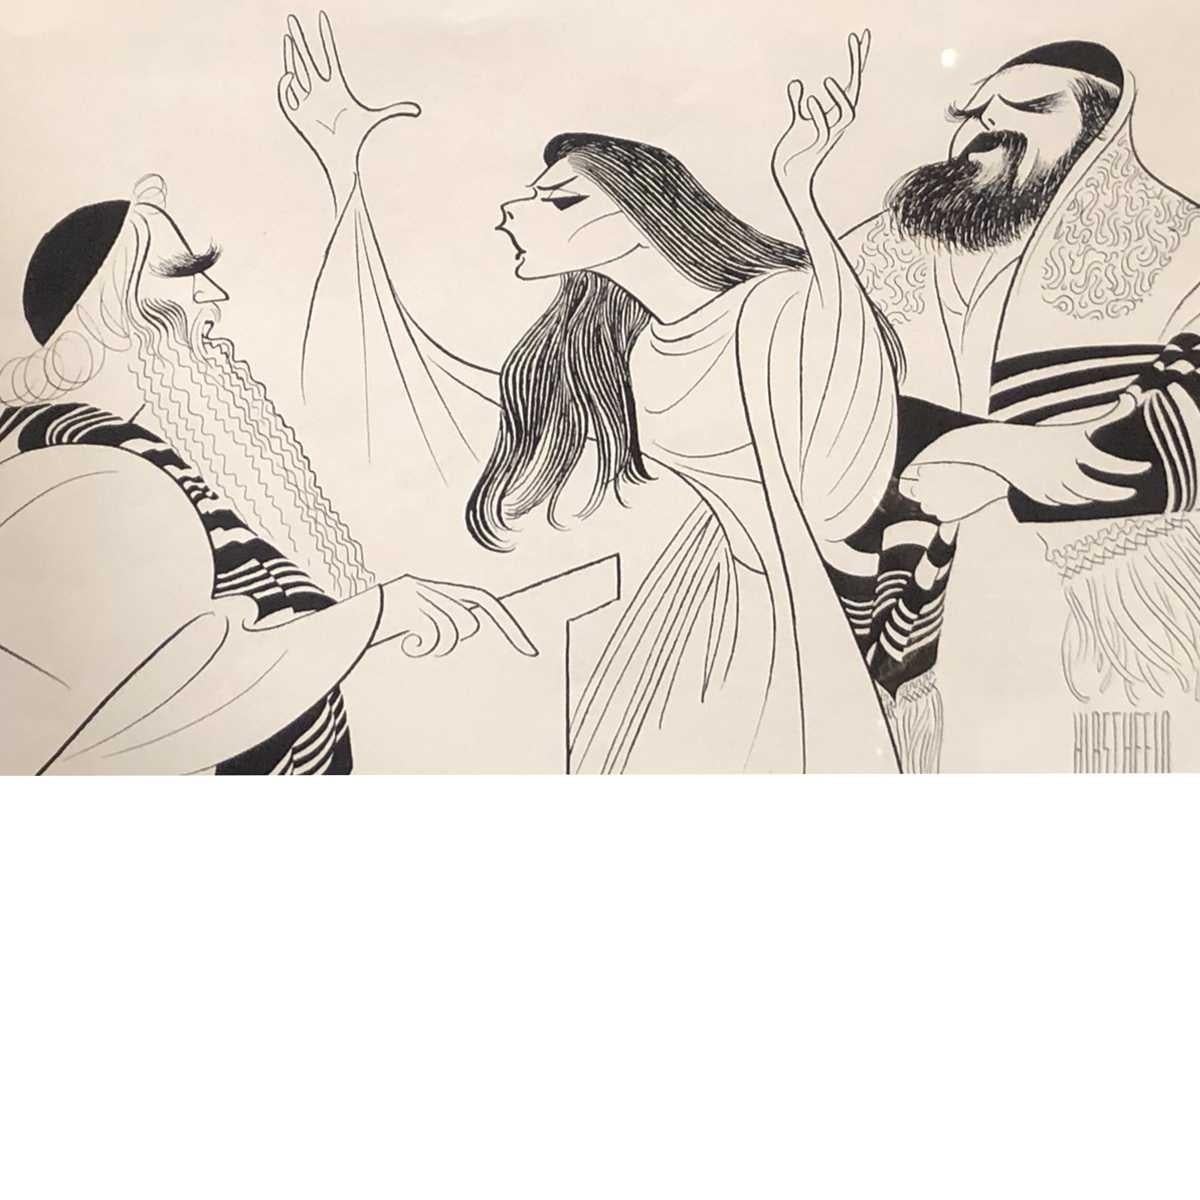 Al Hirschfeld The Dybbuk Lithograph, Post Ninas birth painting in which in the majority of his painting after the birth of his daughter he wrote the word Nina in the sketch for her to find it.

Hand-signed, limited-edition etching of two rabbis